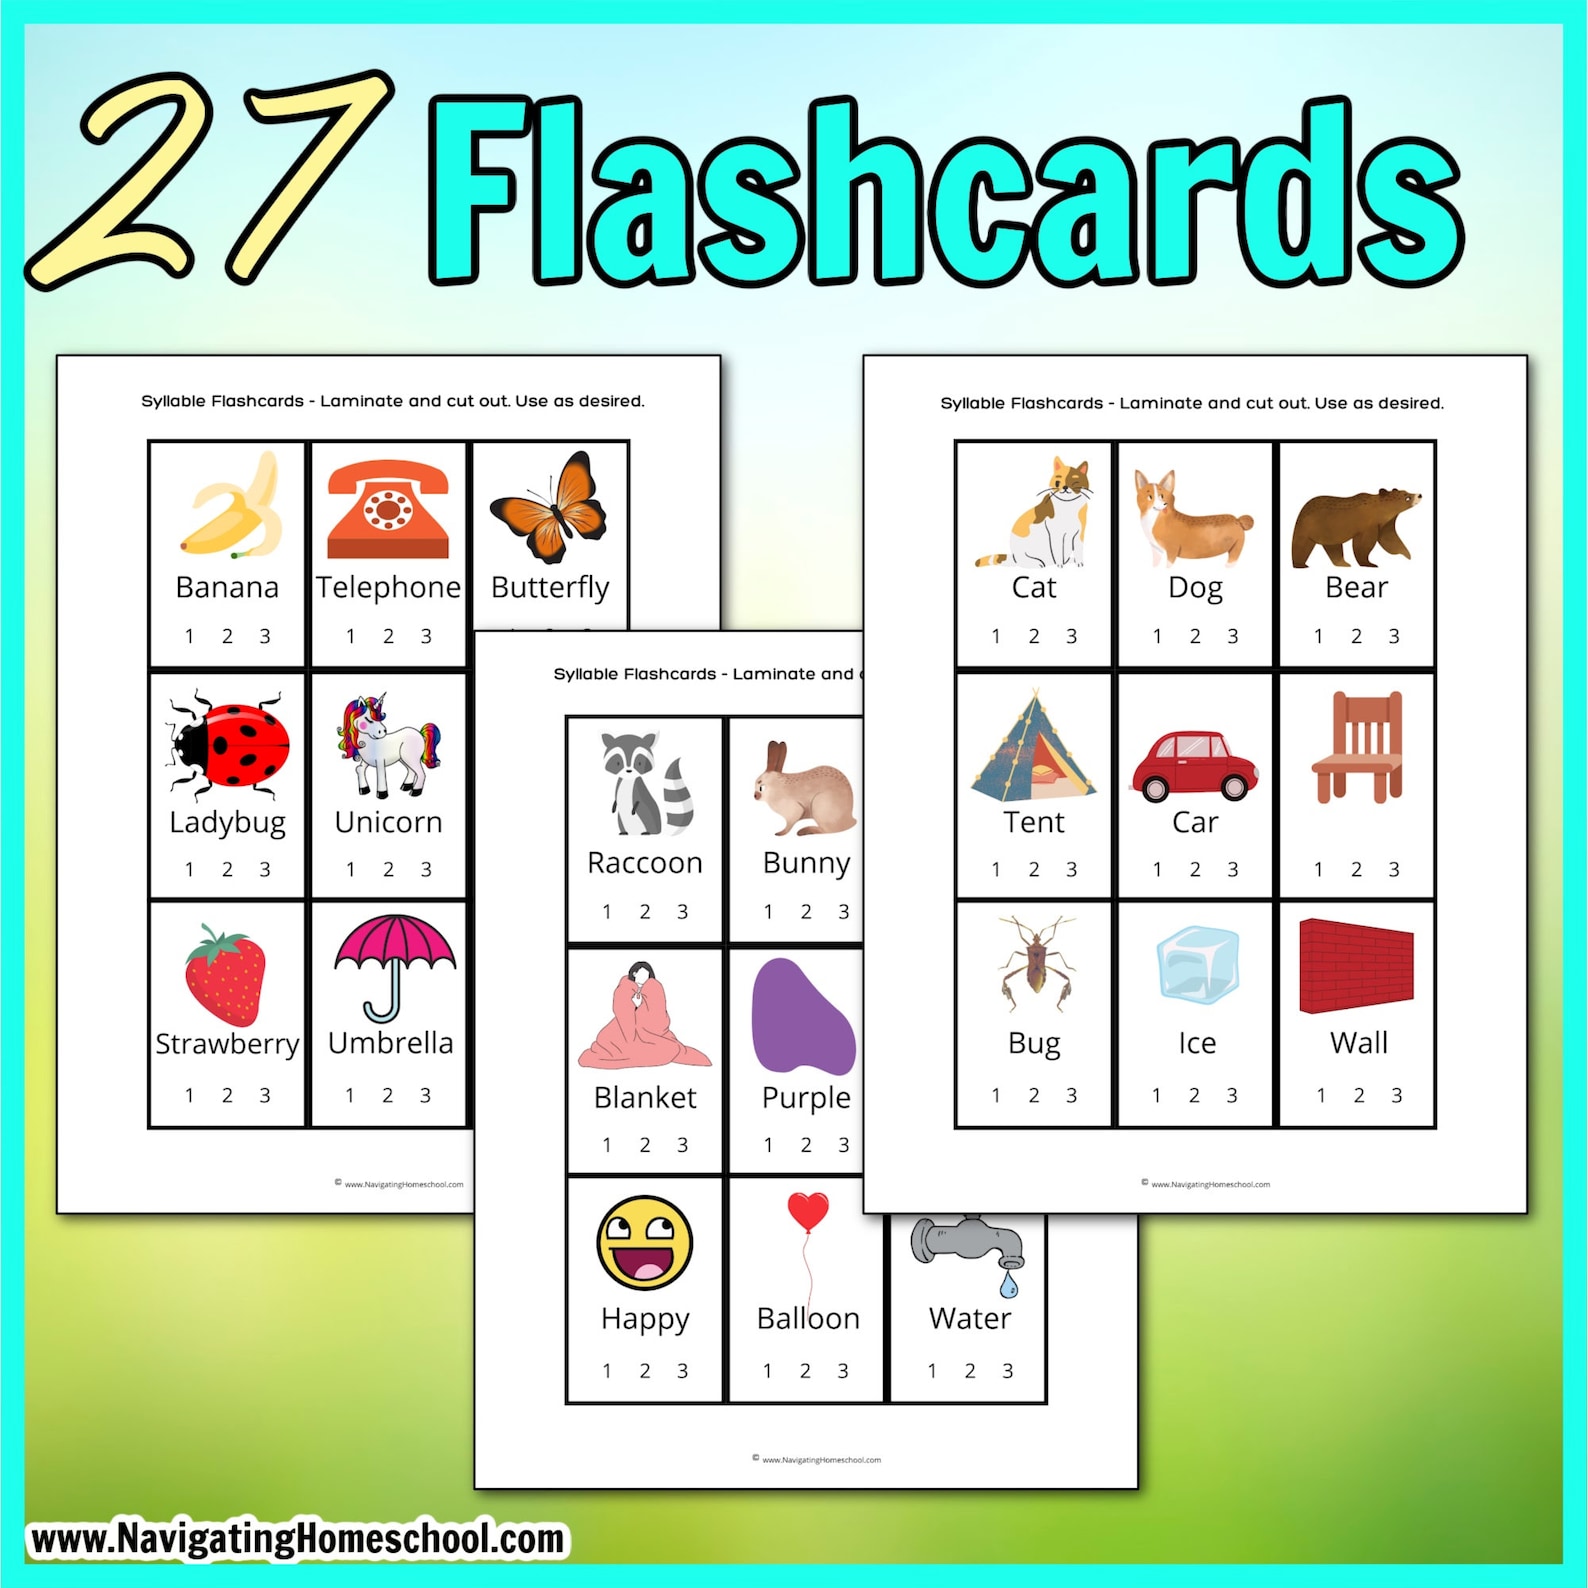 syllables-flashcard-counting-syllables-vocabulary-cards-etsy-uk